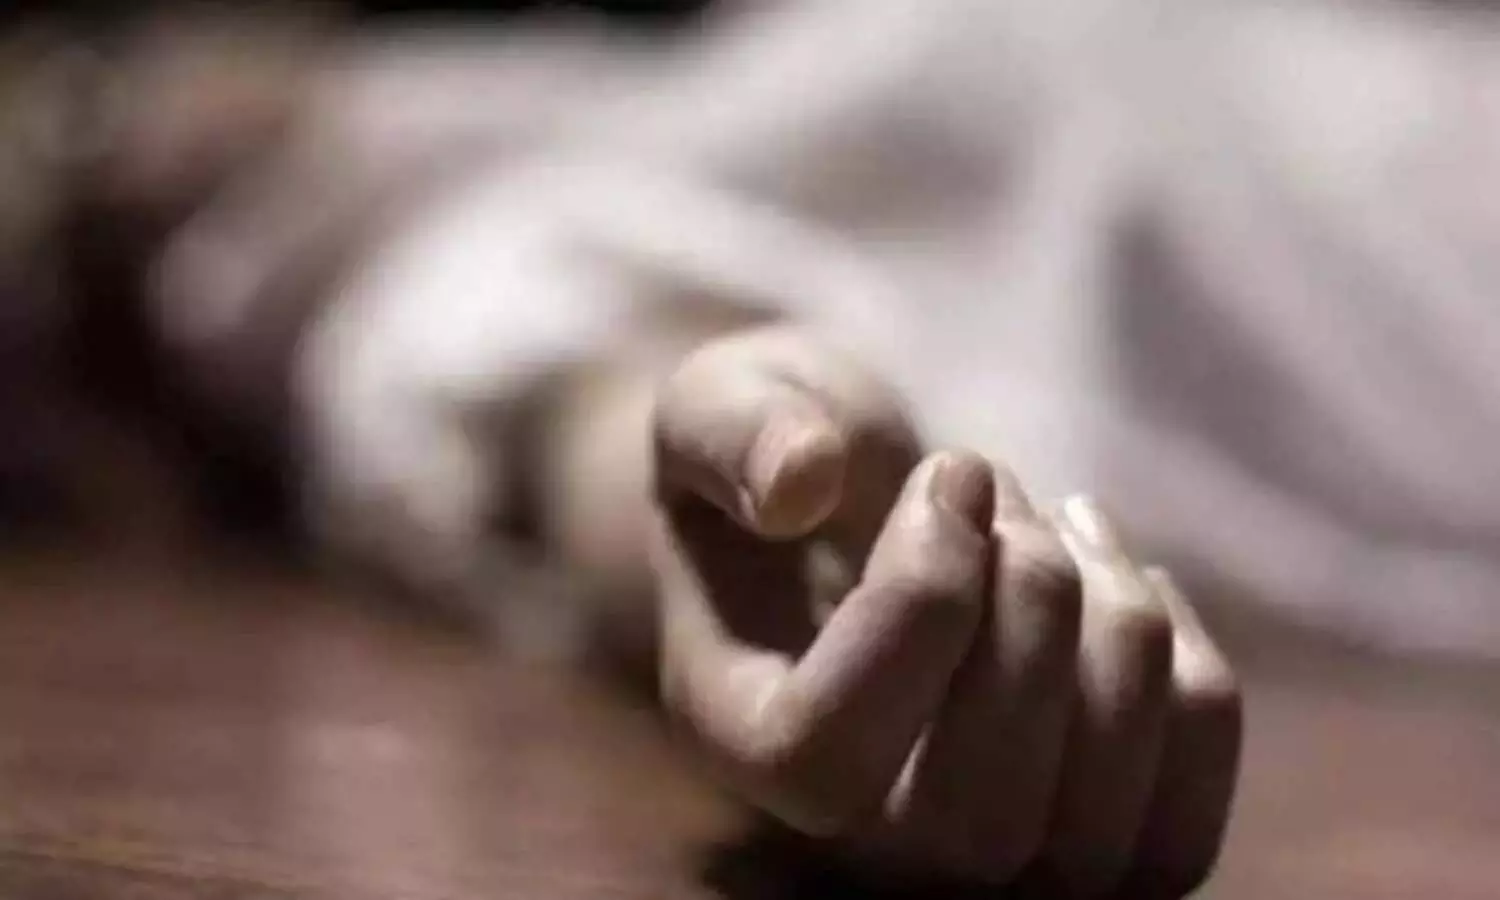 Secunderabad: Army Dental College student ends life, police suspect depression